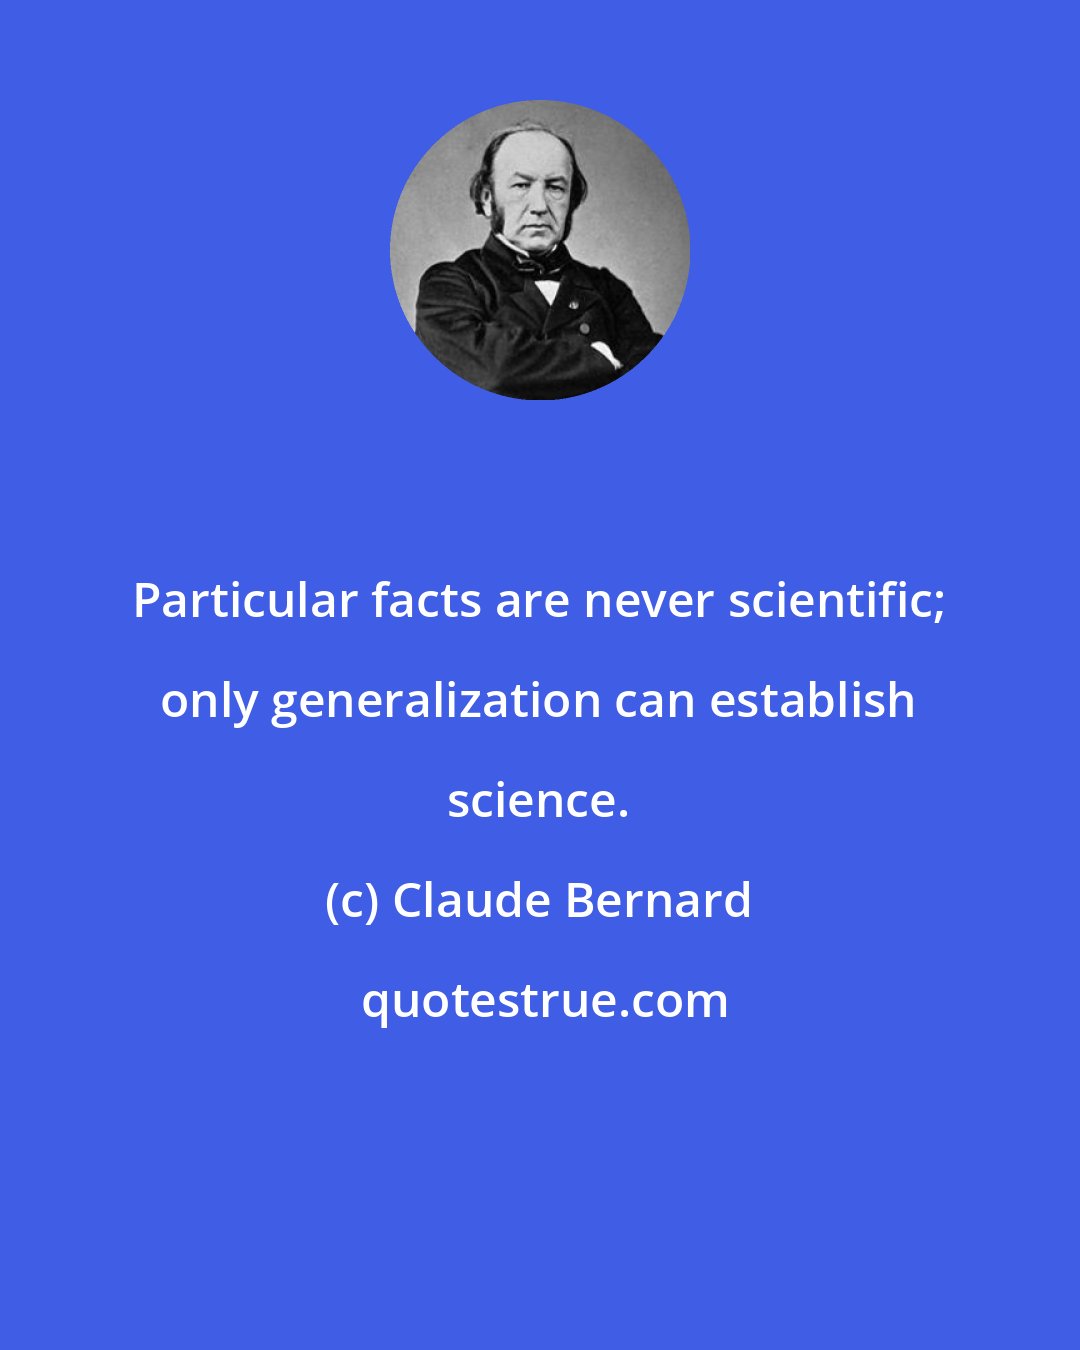 Claude Bernard: Particular facts are never scientific; only generalization can establish science.